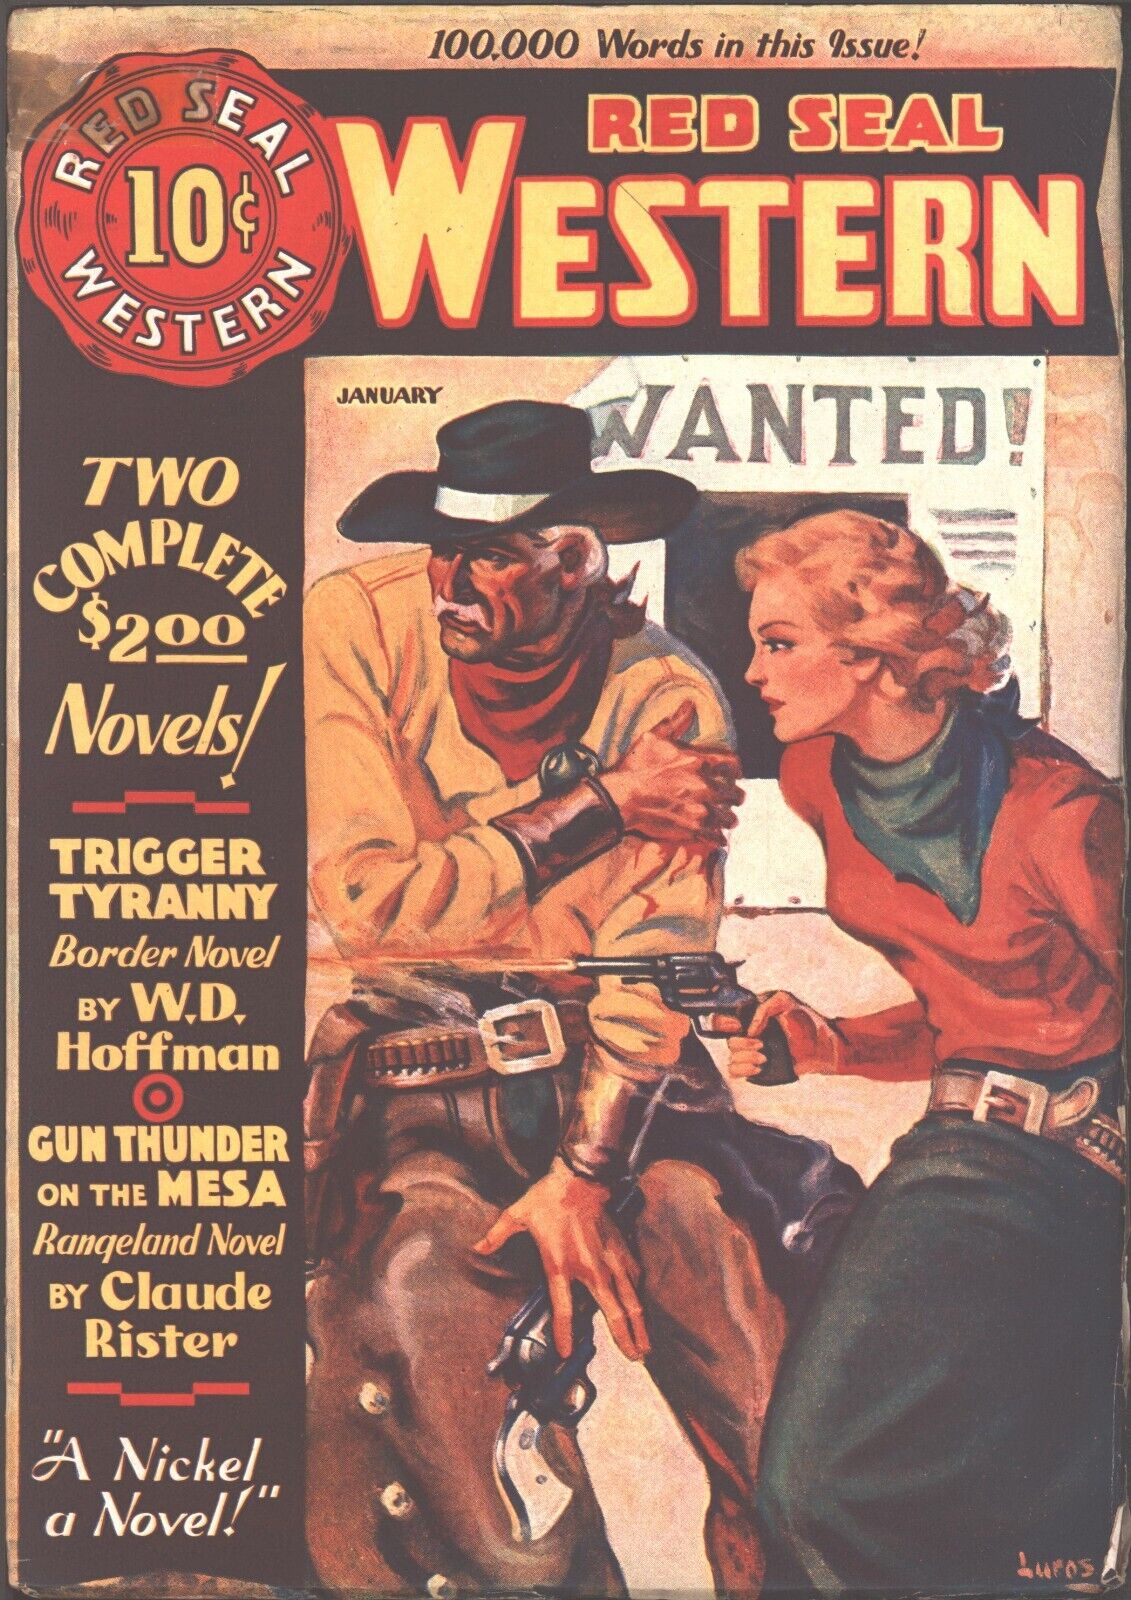 Red Seal Western 1936 January.    Pulp